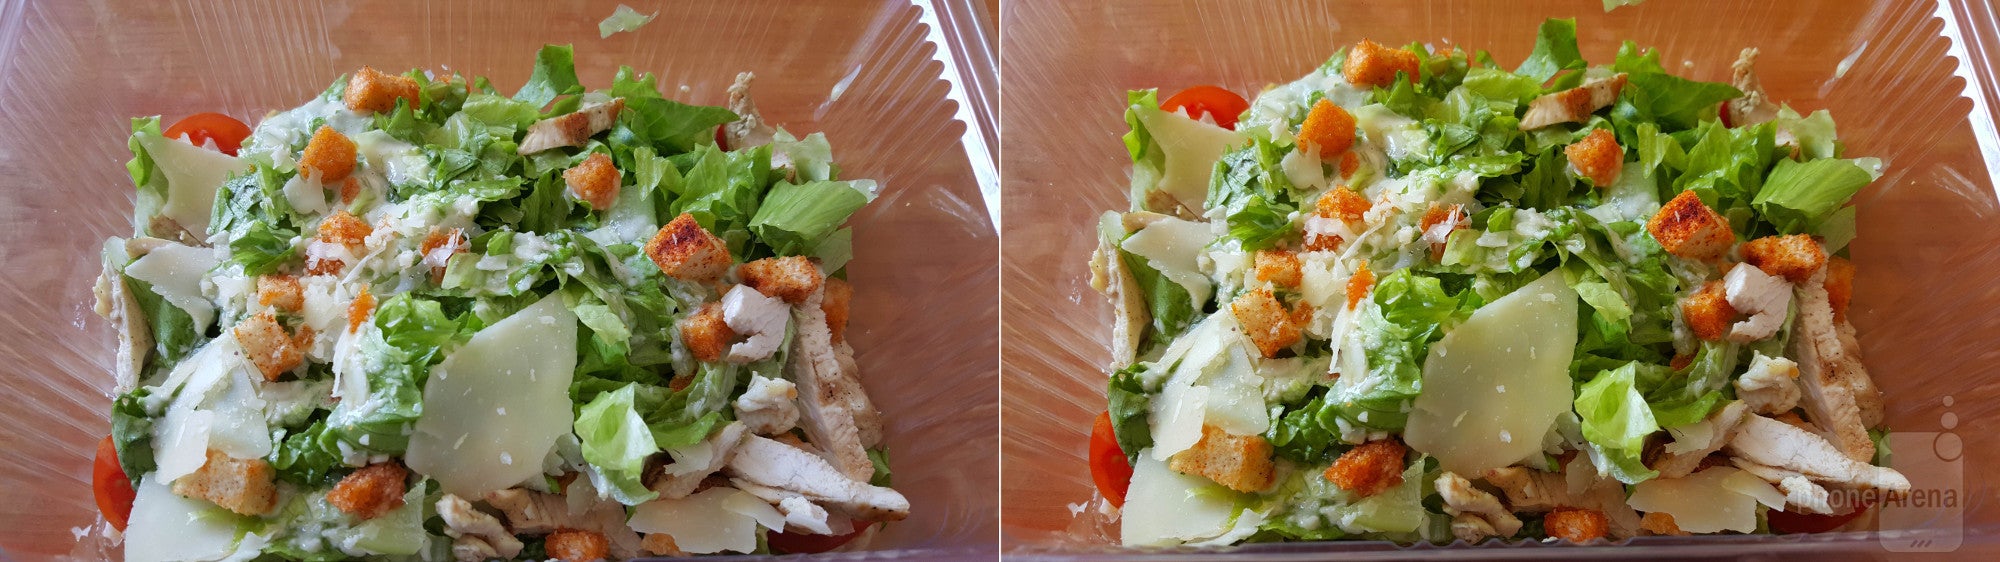 Auto (left) vs Food (right). - Living with the Samsung Galaxy S6: In-depth camera review